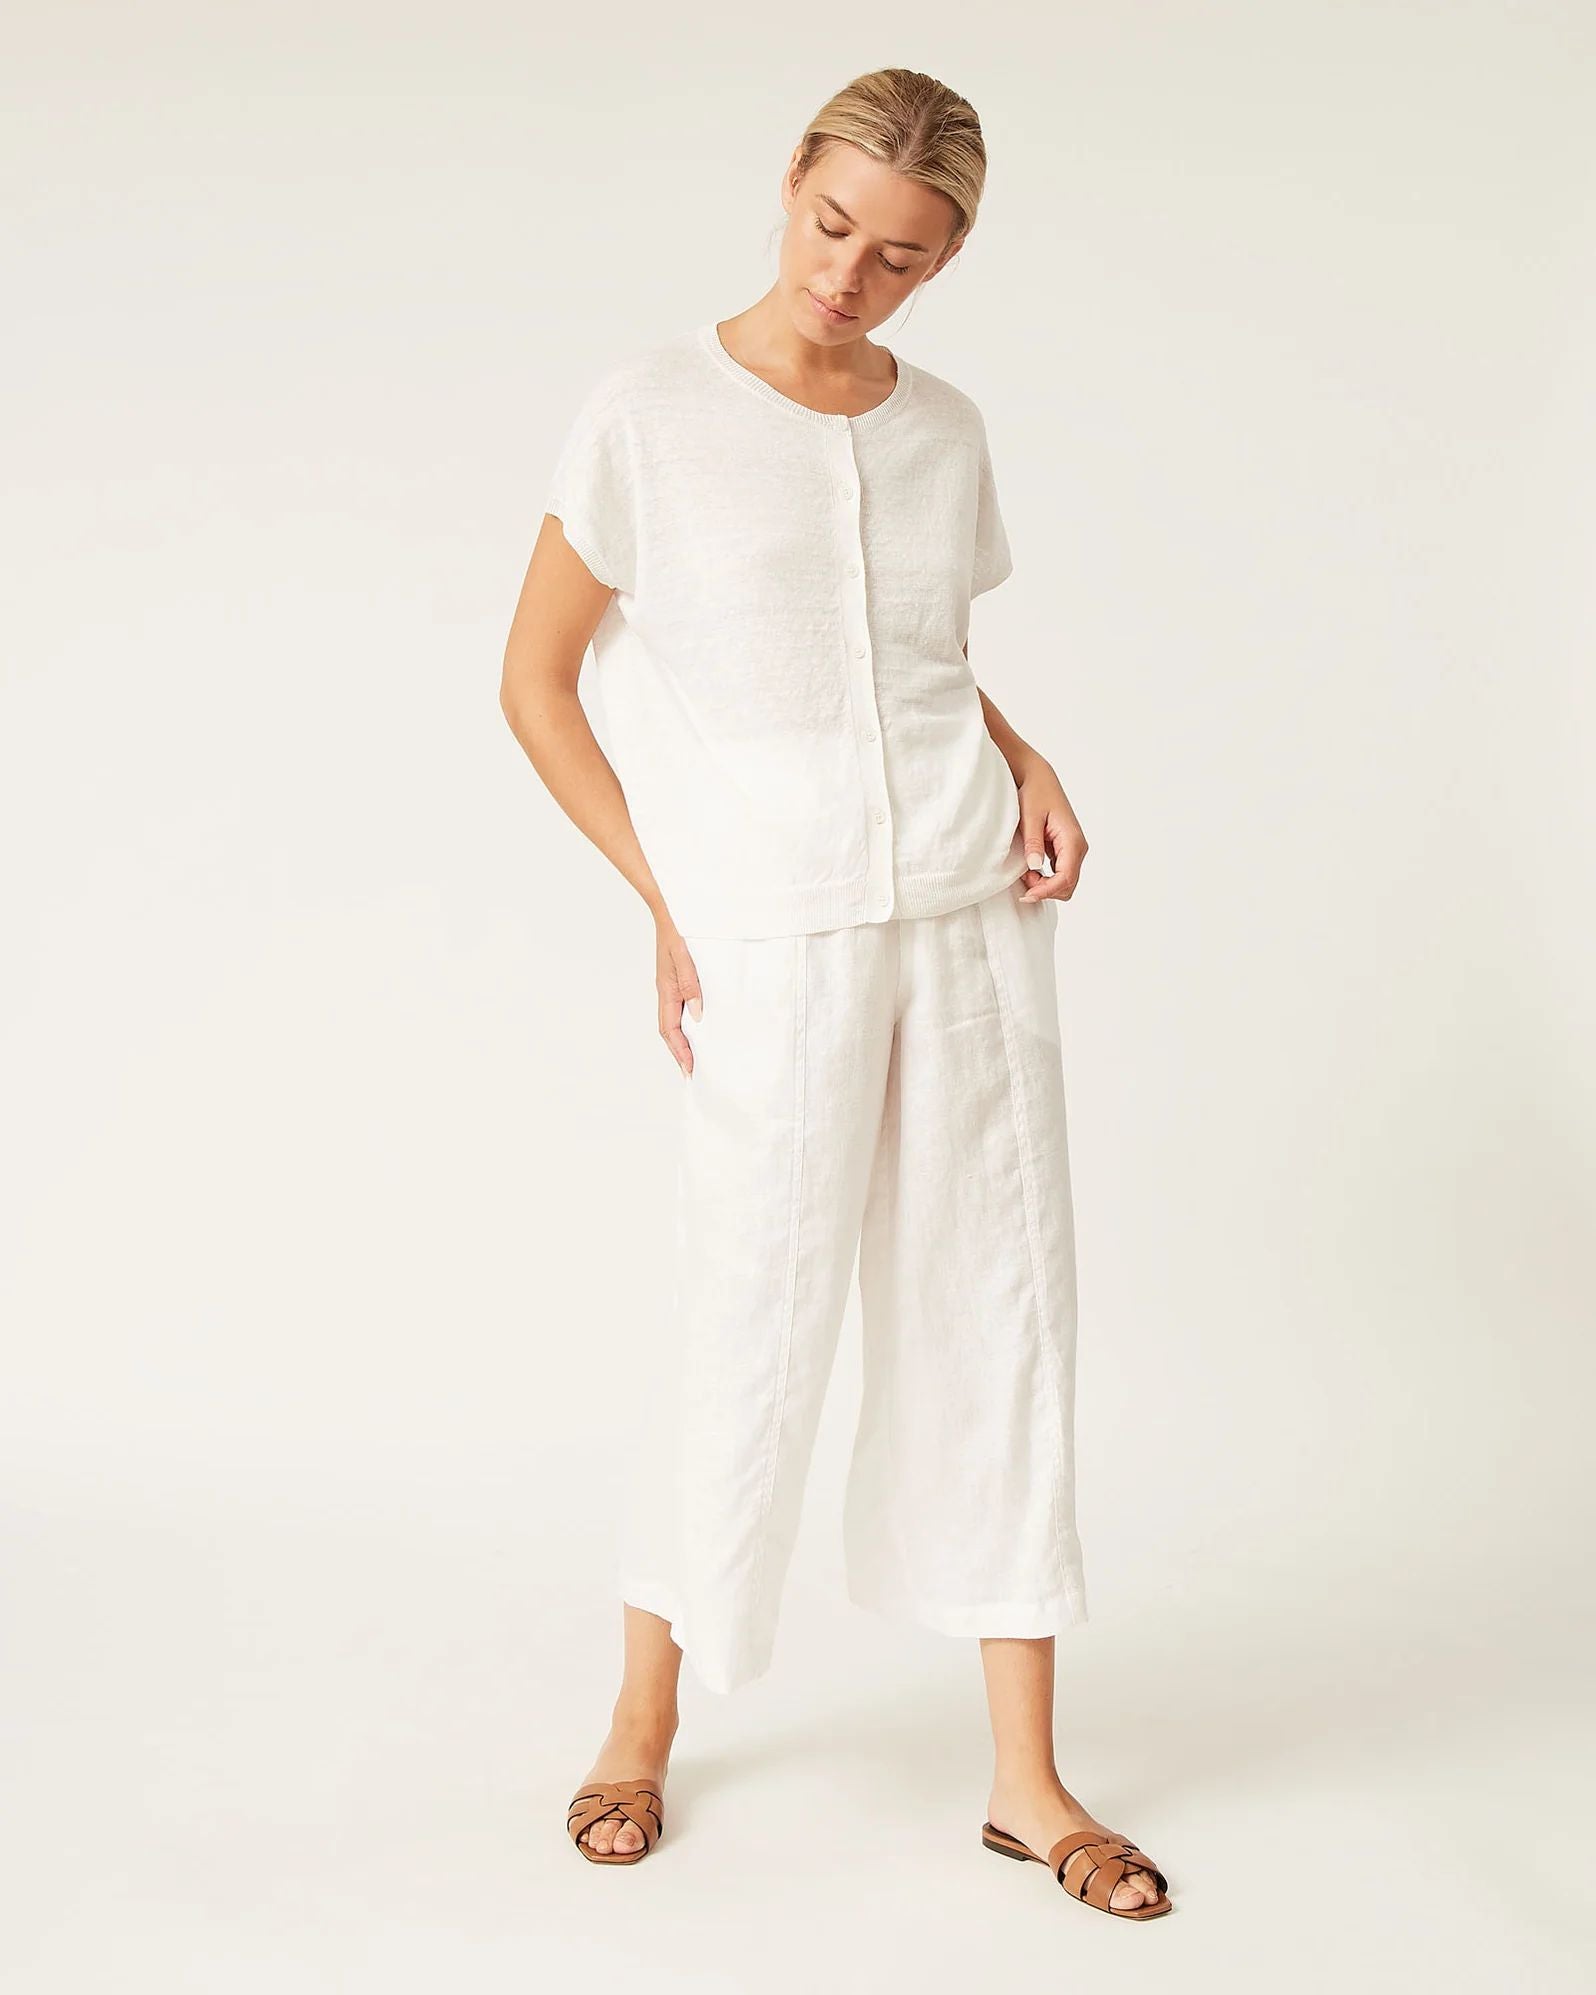 Naif Luce Short Sleeve Linen Cardigan in Ivory